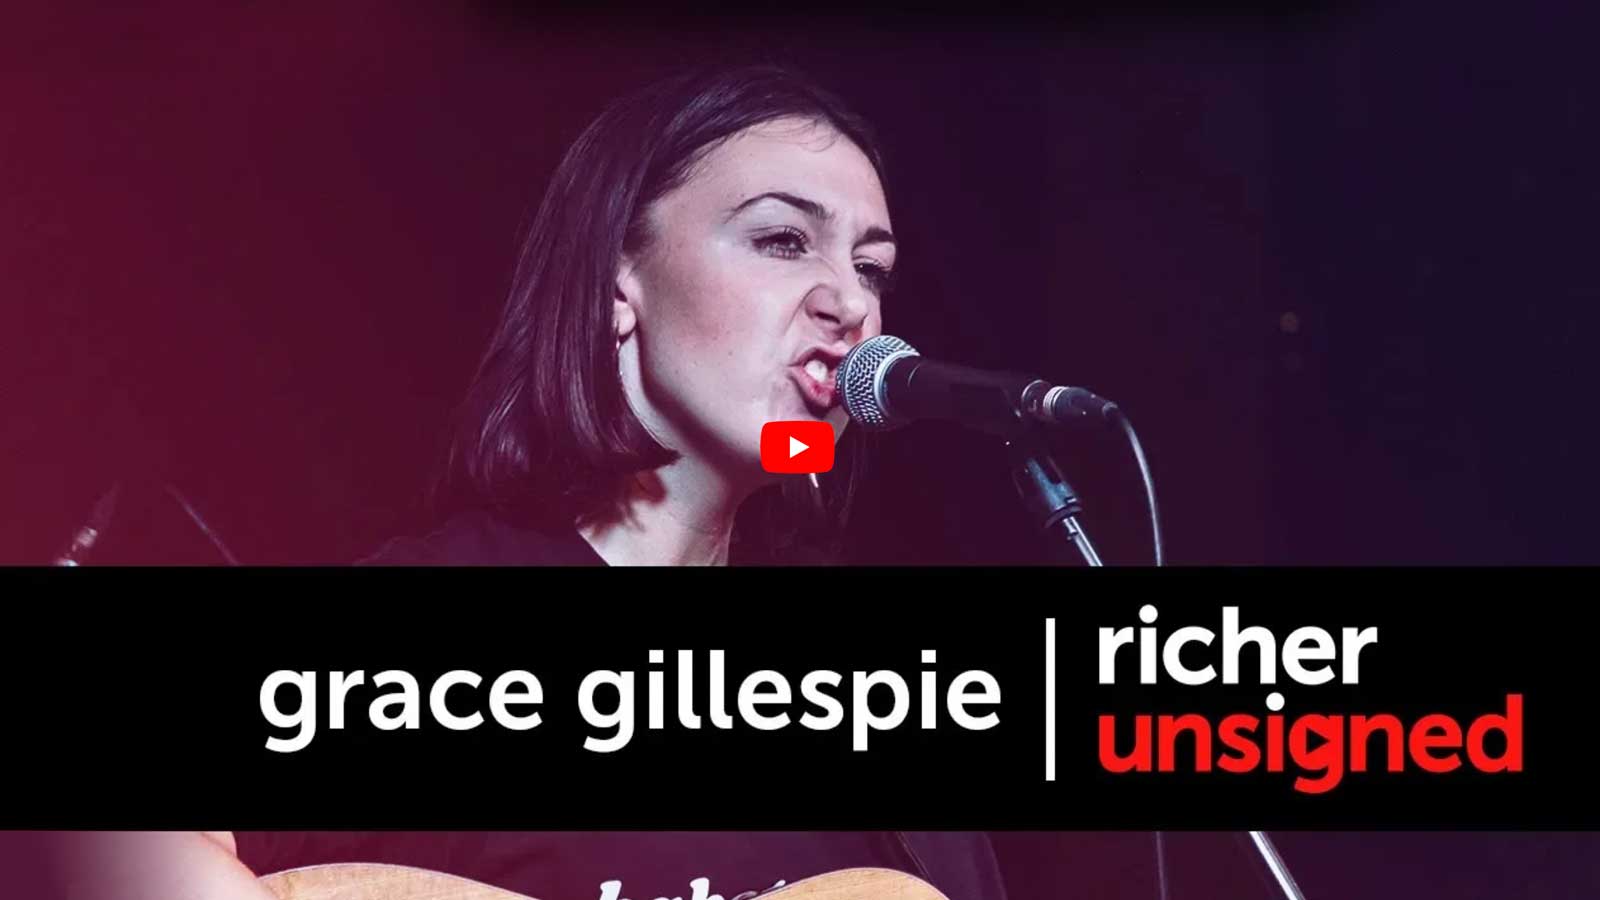 grace_gillespie_youtube_title